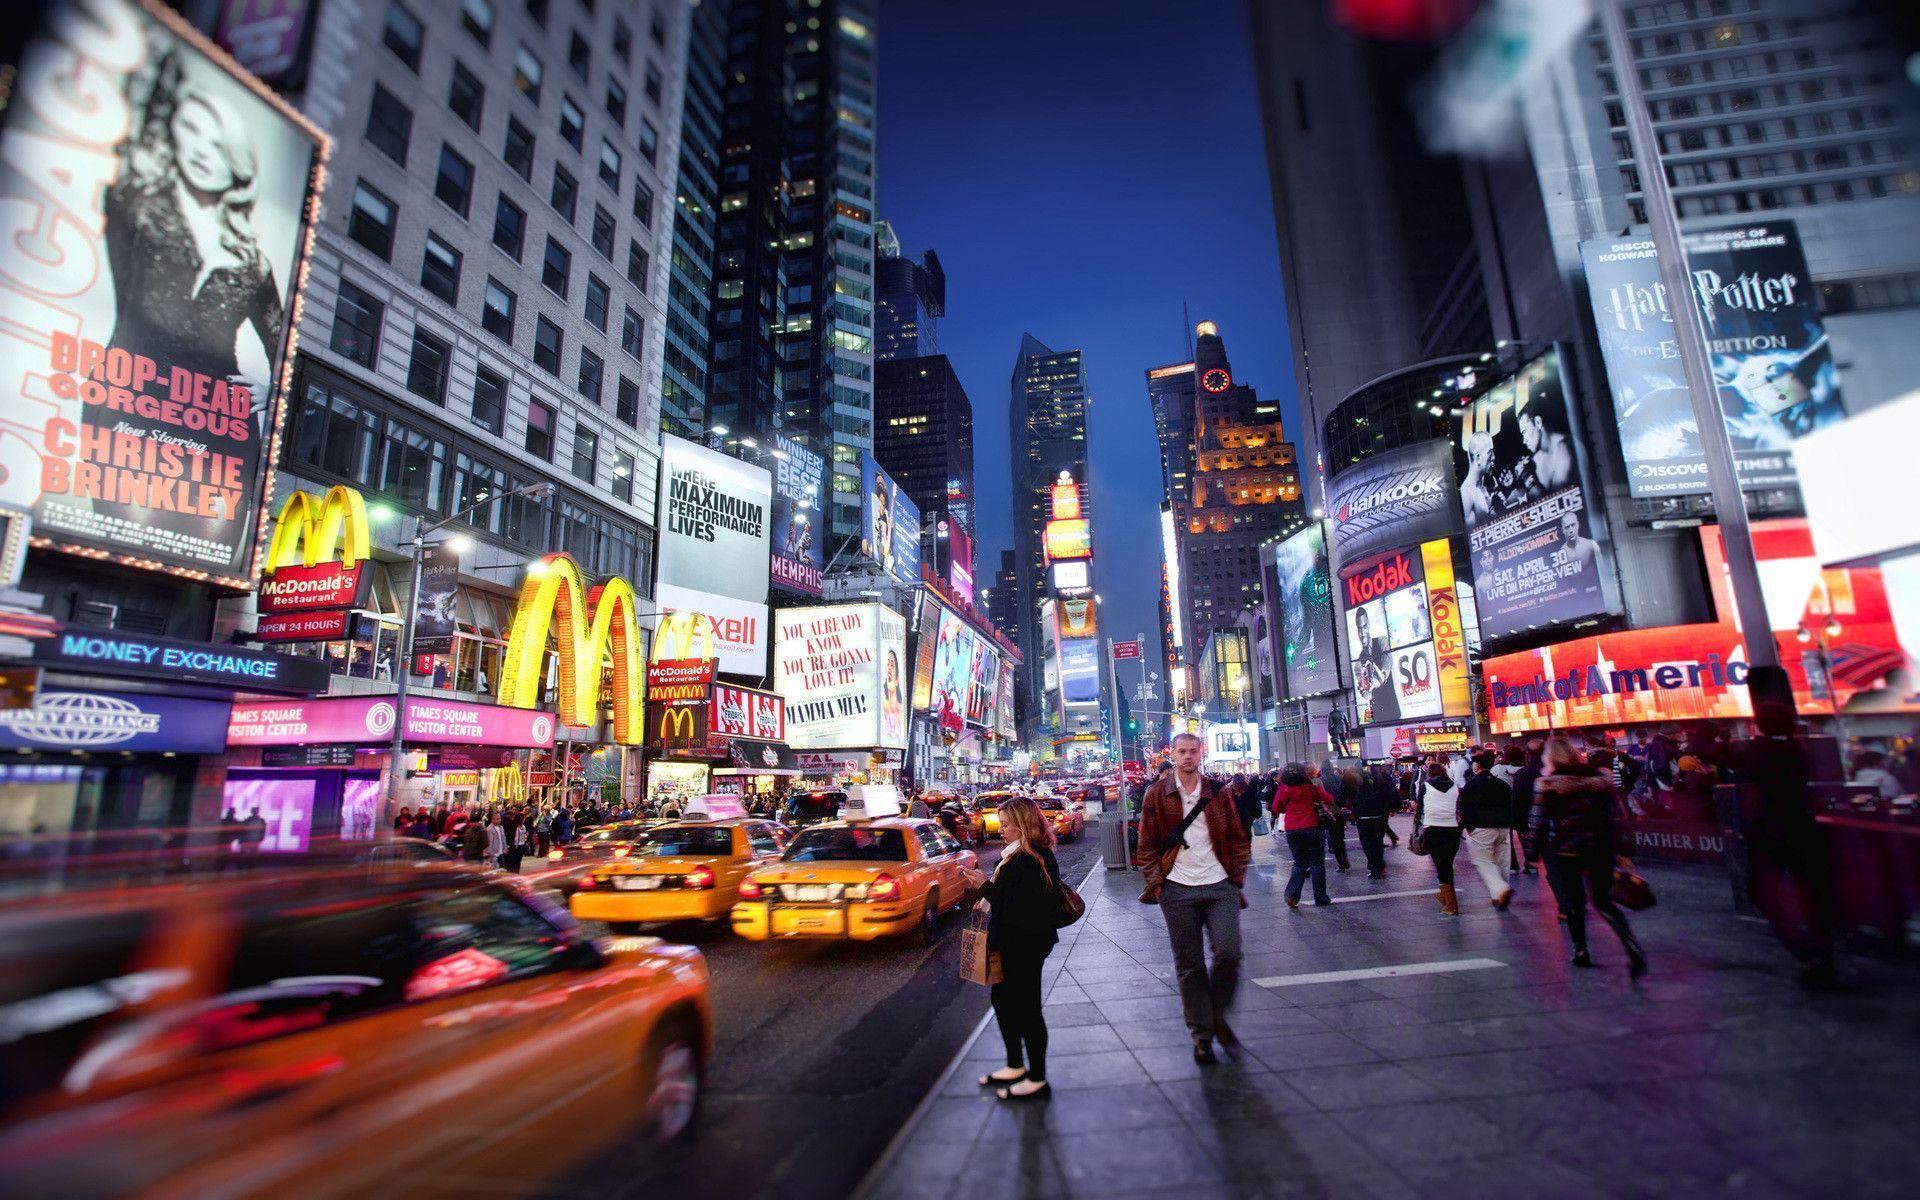 Awesome Times Square wallpaper. Times Square wallpaper